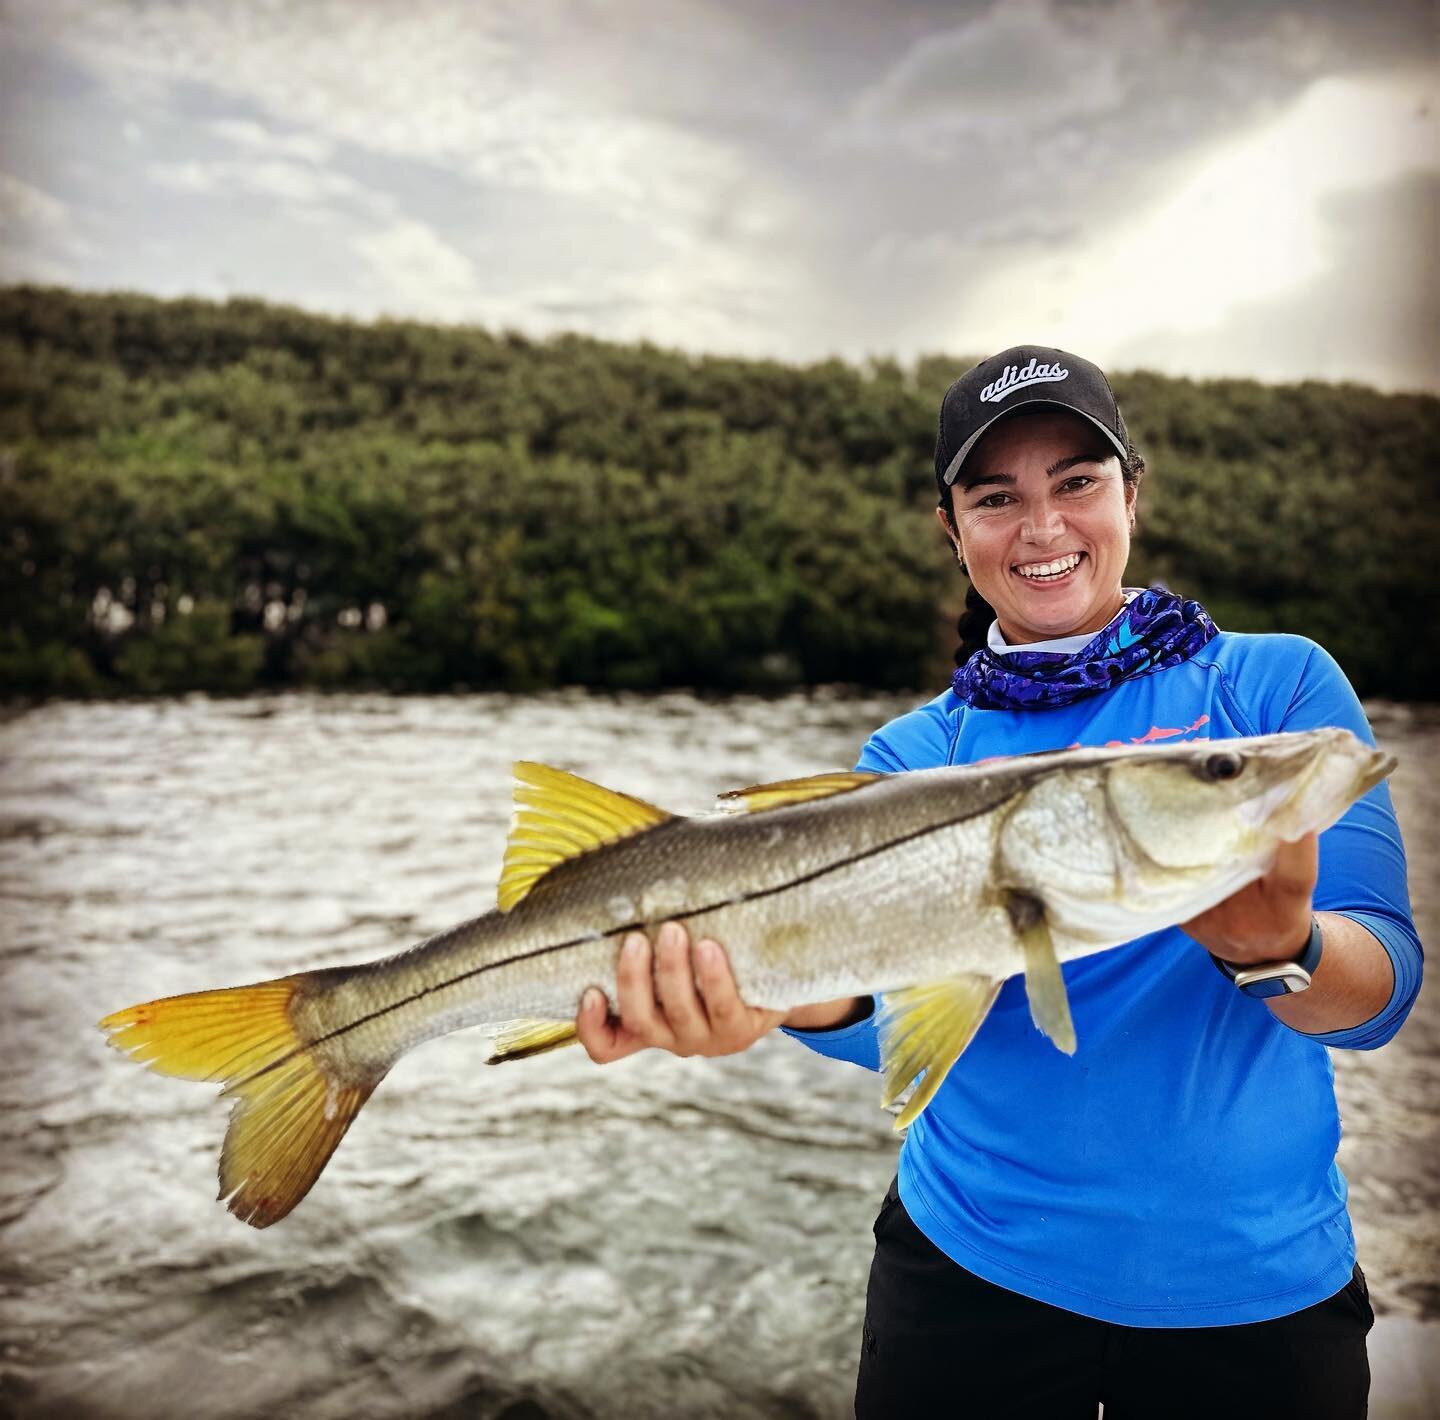 Isabella with her first Snook this morning #crystalriver #captjameskerr
#crystalriverflatsfishing #fishing #naturecoast #seatrout #snook  #visitflorida #sodiumfishinggear #crystalriverfishing #inshorefishing #redfish 

www.crystalriverflatsfishing.co